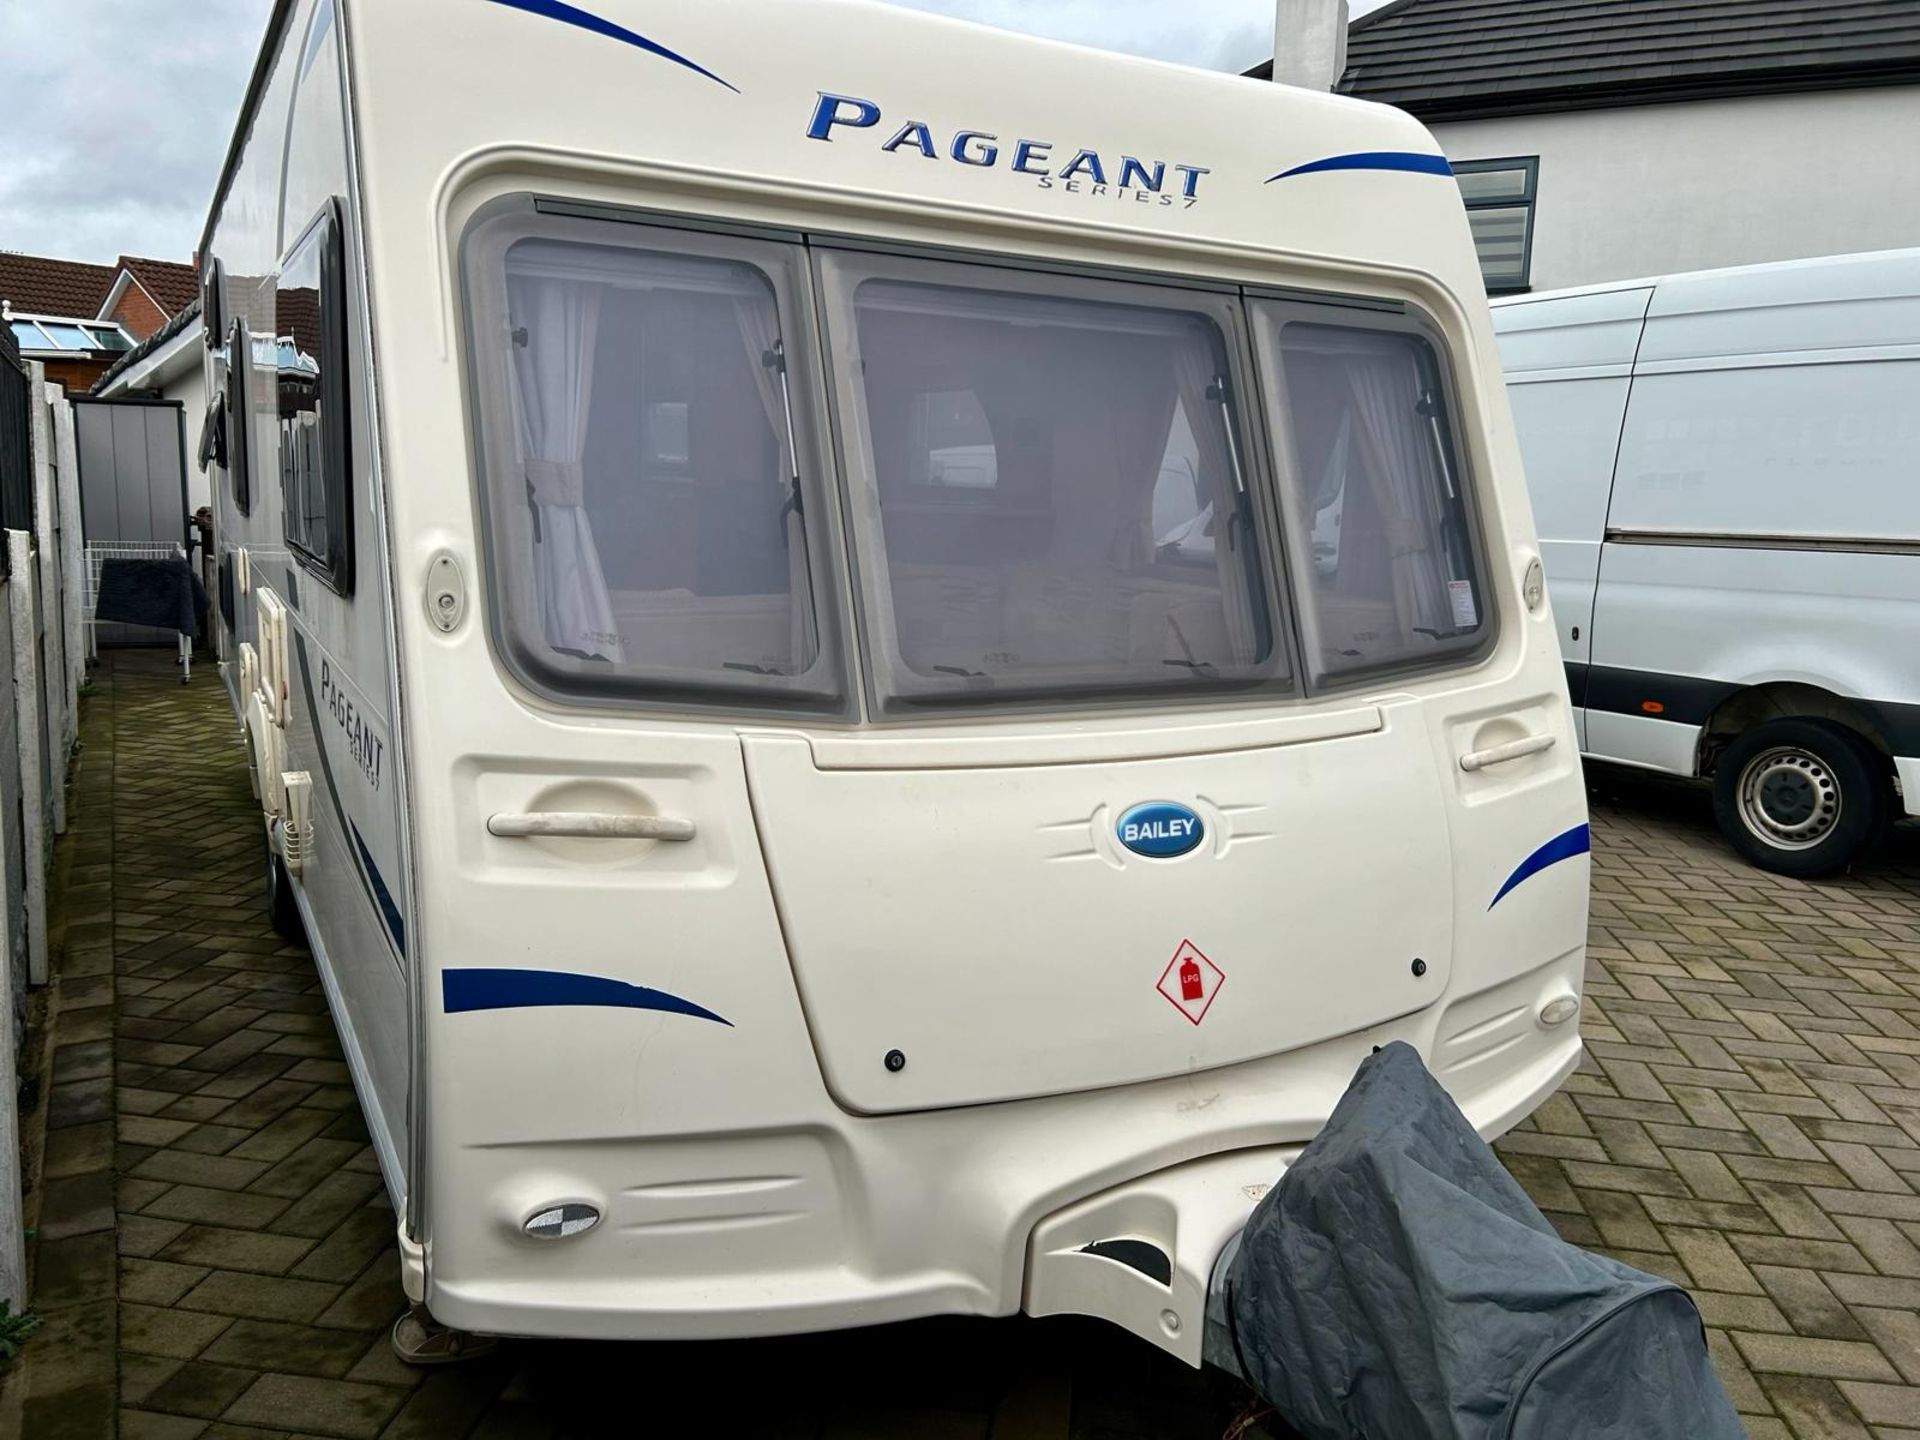 2010 BAILEY PAGEANT SERIES 7 MOVER & AWNING CARAVAN *NO VAT* - Image 4 of 19